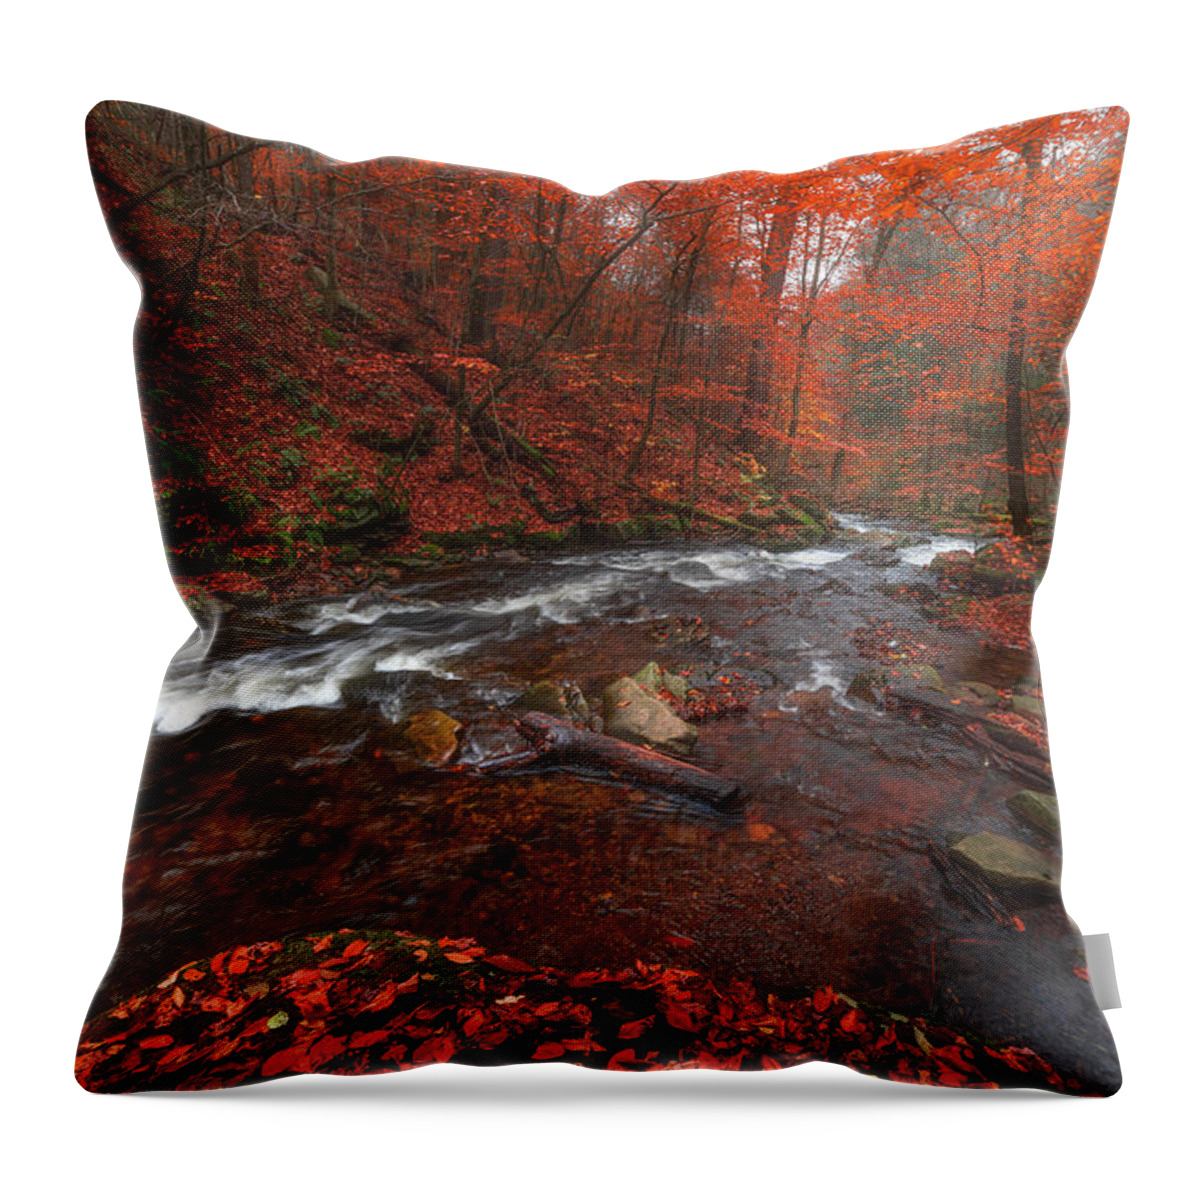 Fall Scenes Throw Pillow featuring the photograph Autumn Fire by Darren White